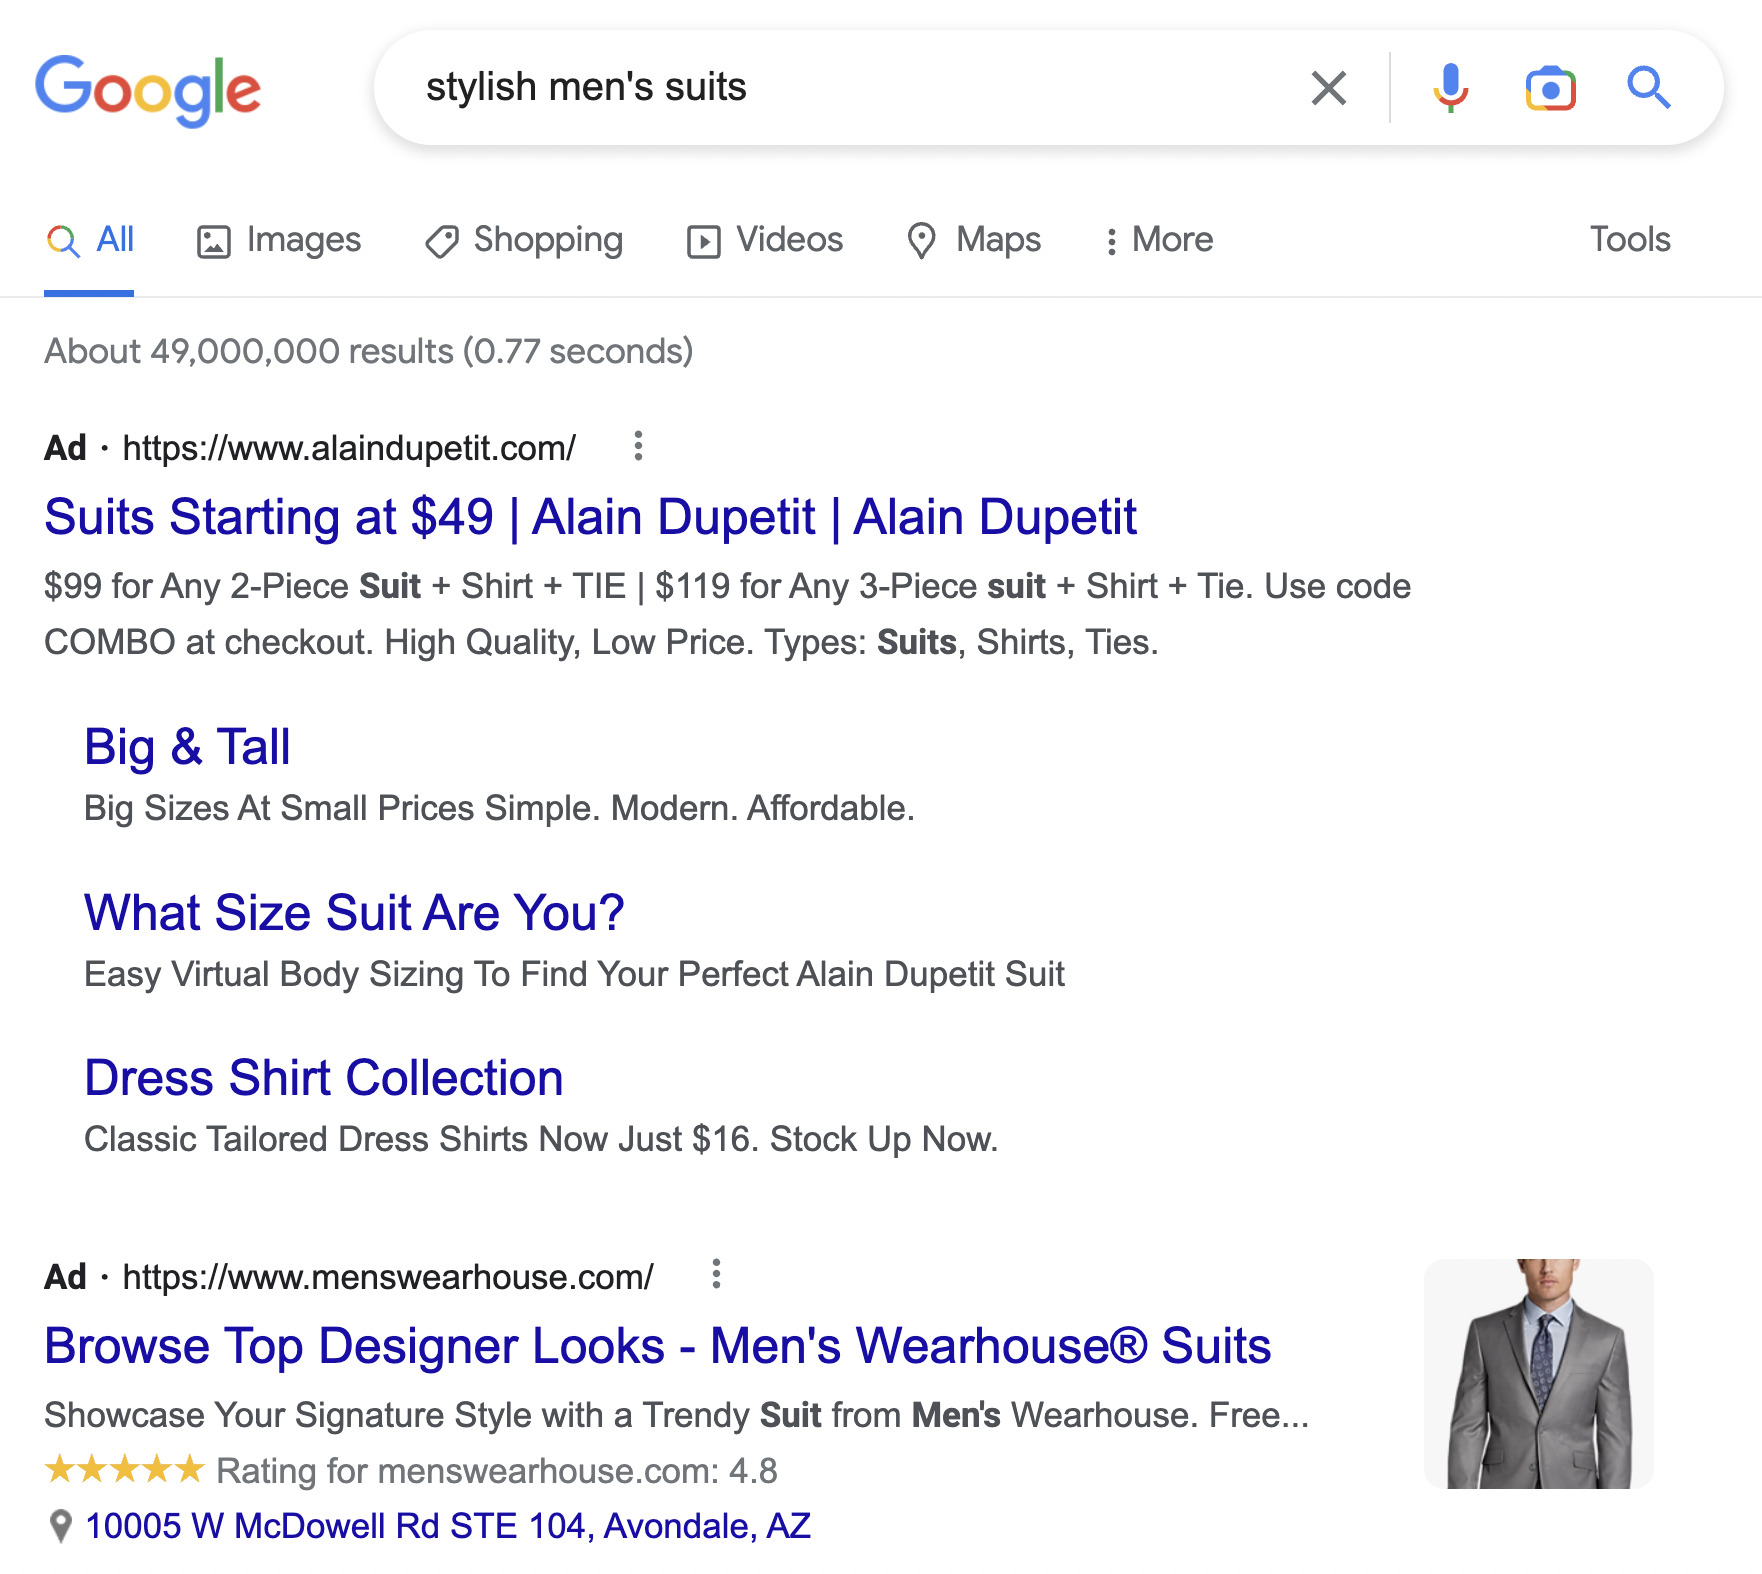 Google search results for "stylish men's suits"